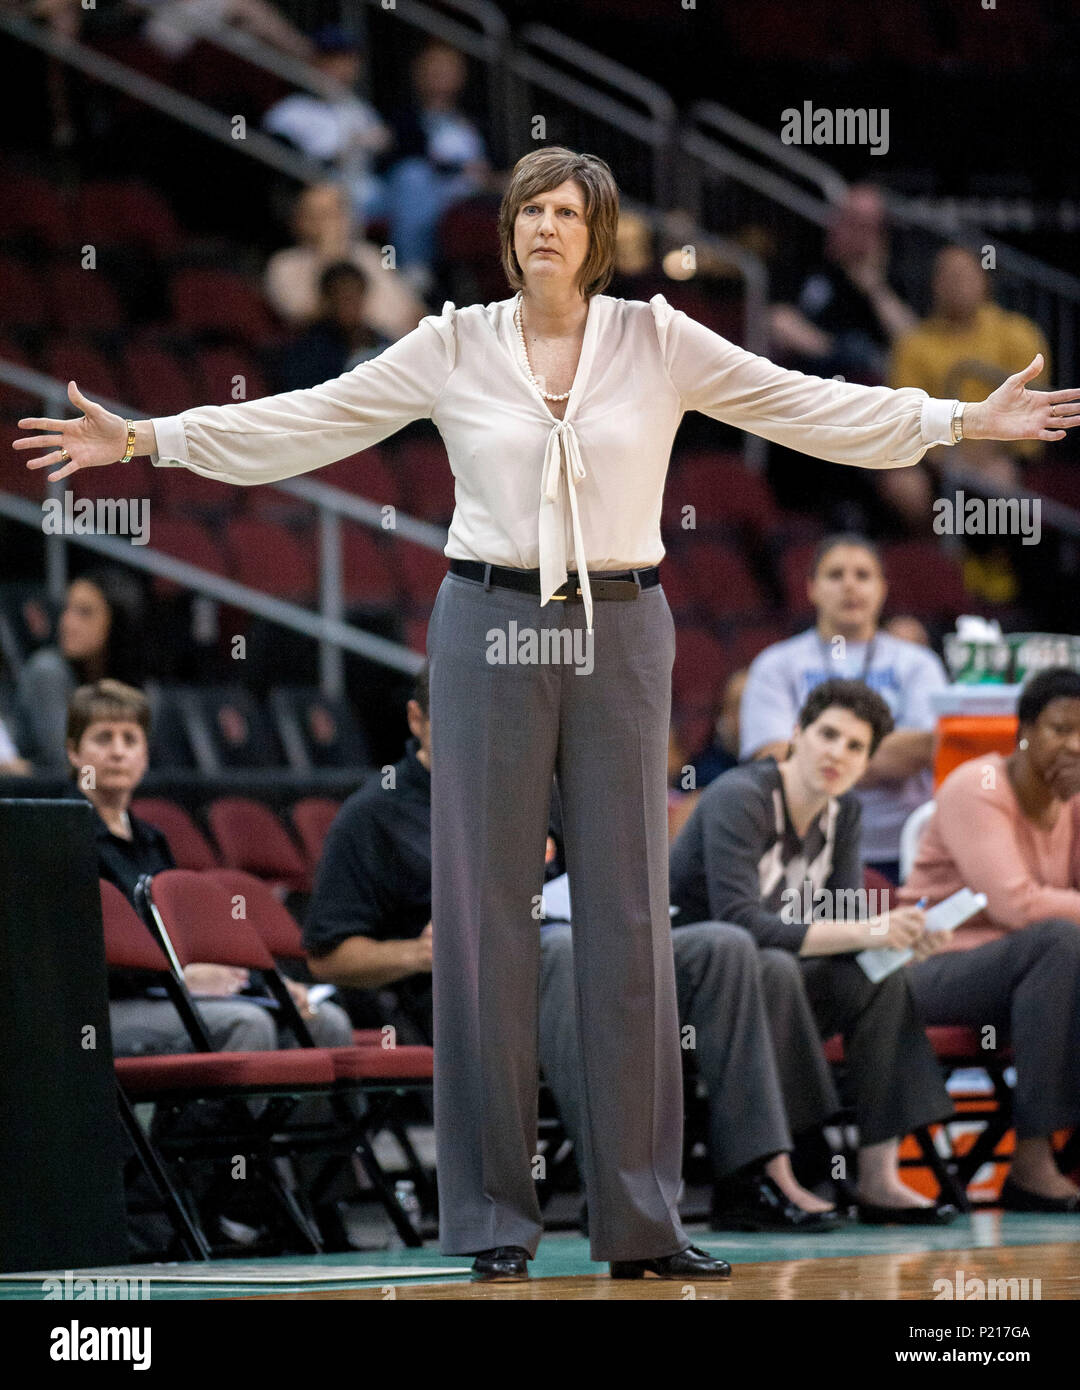 File. 13th June, 2018. ANNE THERESA DONOVAN (November 1, 1961 - June 13, 2018) was an American women's basketball player and coach. From 2013 to 2015, she was the head coach of the Connecticut Sun. Donovan won a national championship, won two Olympic gold medals, and went to three Final Fours overall, Basketball Hall of Fame in 1995, and became a member of the FIBA Hall of Fame in 2015. PICTURED: May 18, 2013 - Newark, New Jersey, U.S. - Sun's head coach Anne Donovan reacts to a call. Liberty beat Connecticut Sun 78-67. Credit: csm/Alamy Live News Stock Photo